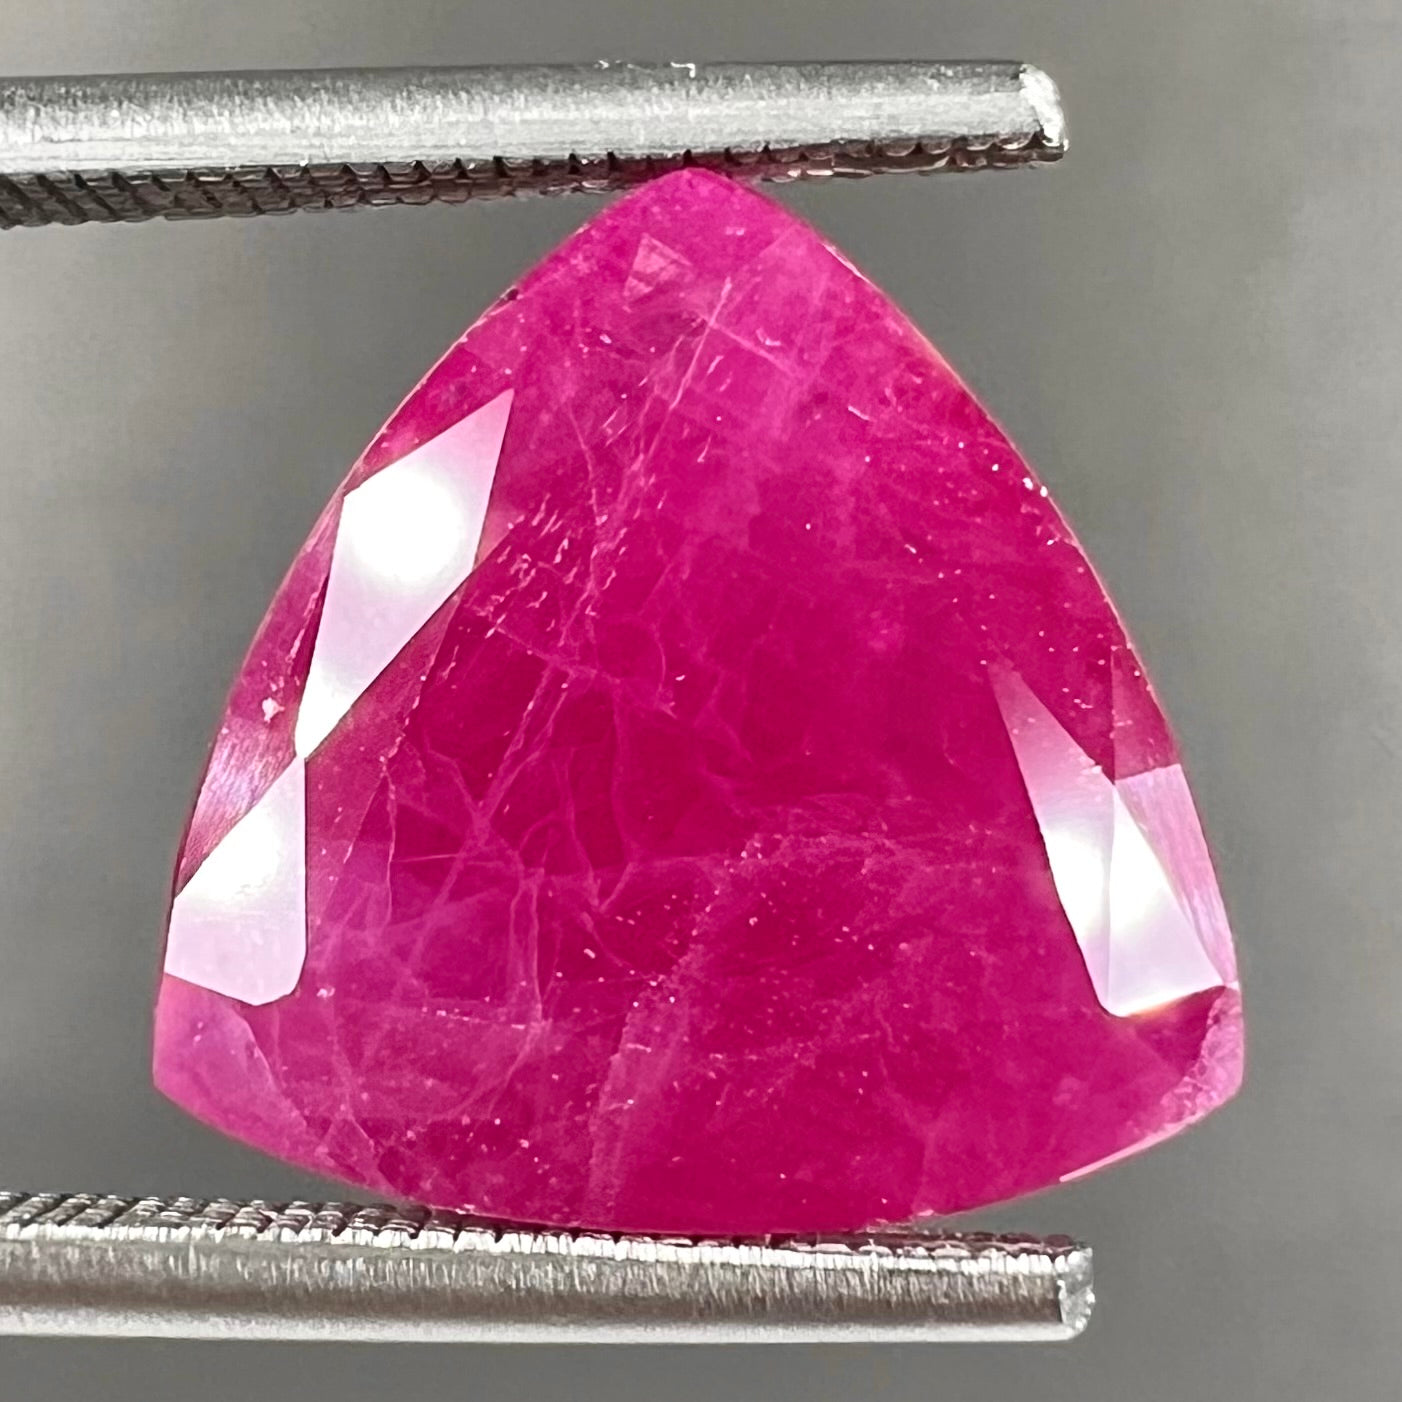 A loose, faceted trillion cut, natural, commercial grade ruby gemstone.  The stone is purplish red color.